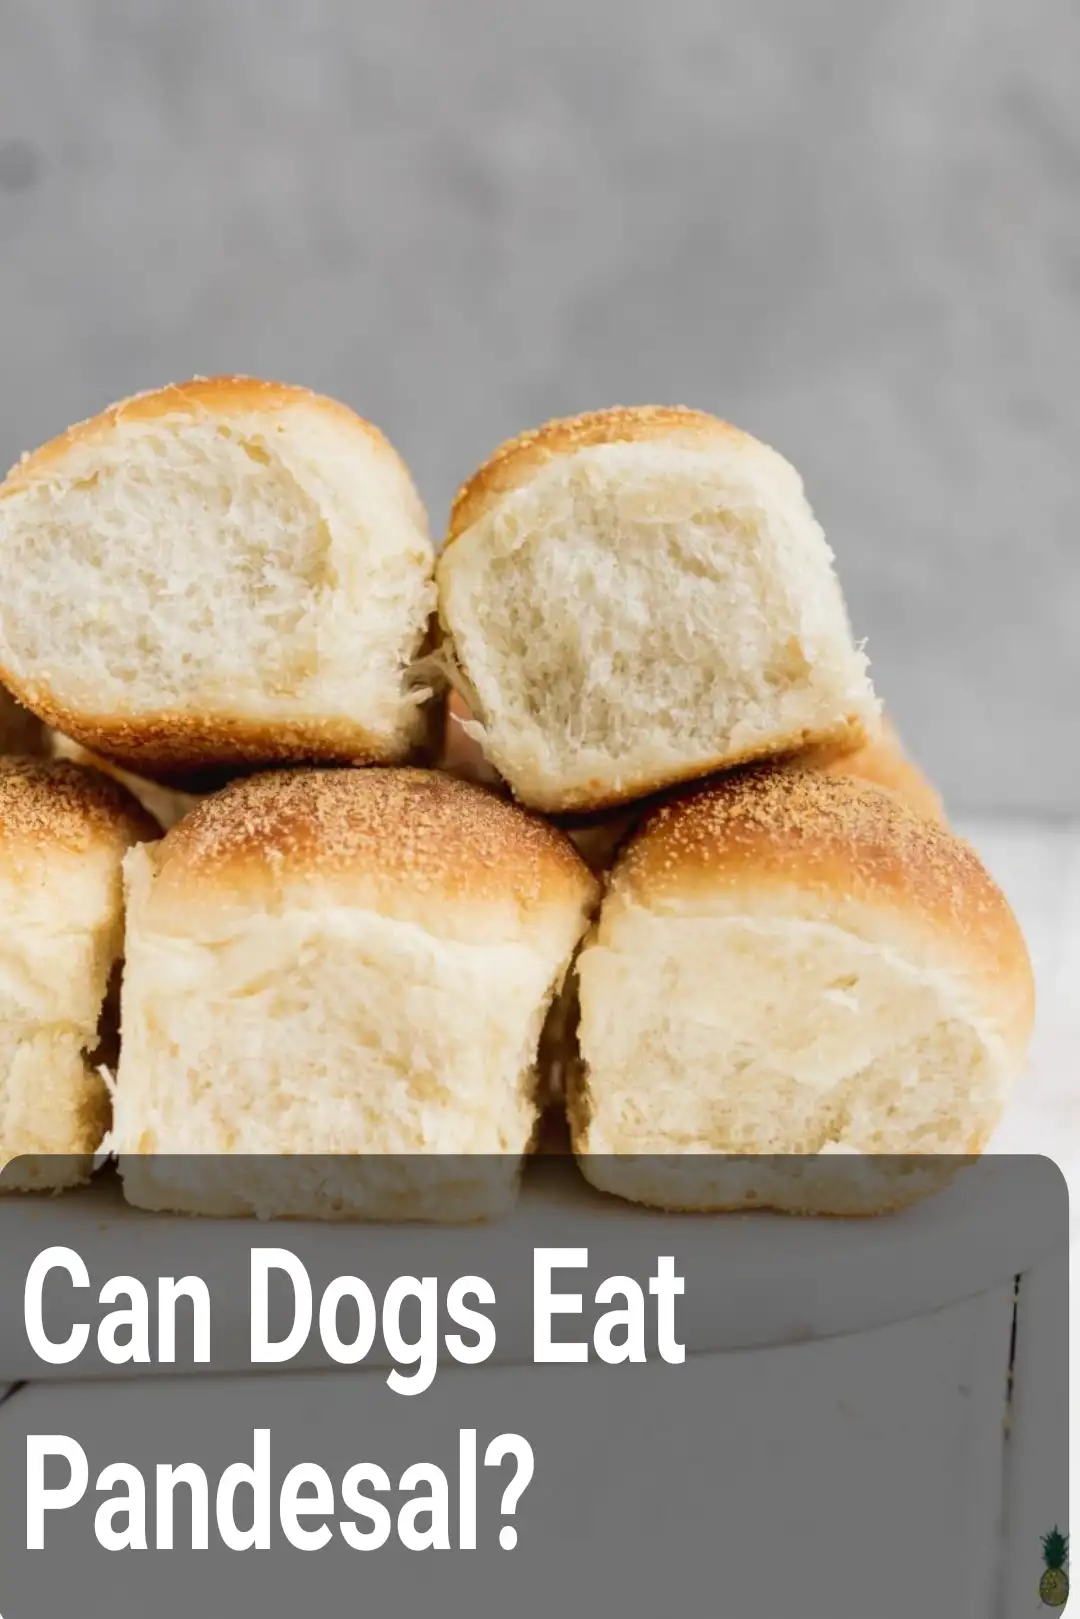 Can Dogs Eat Pandesal?